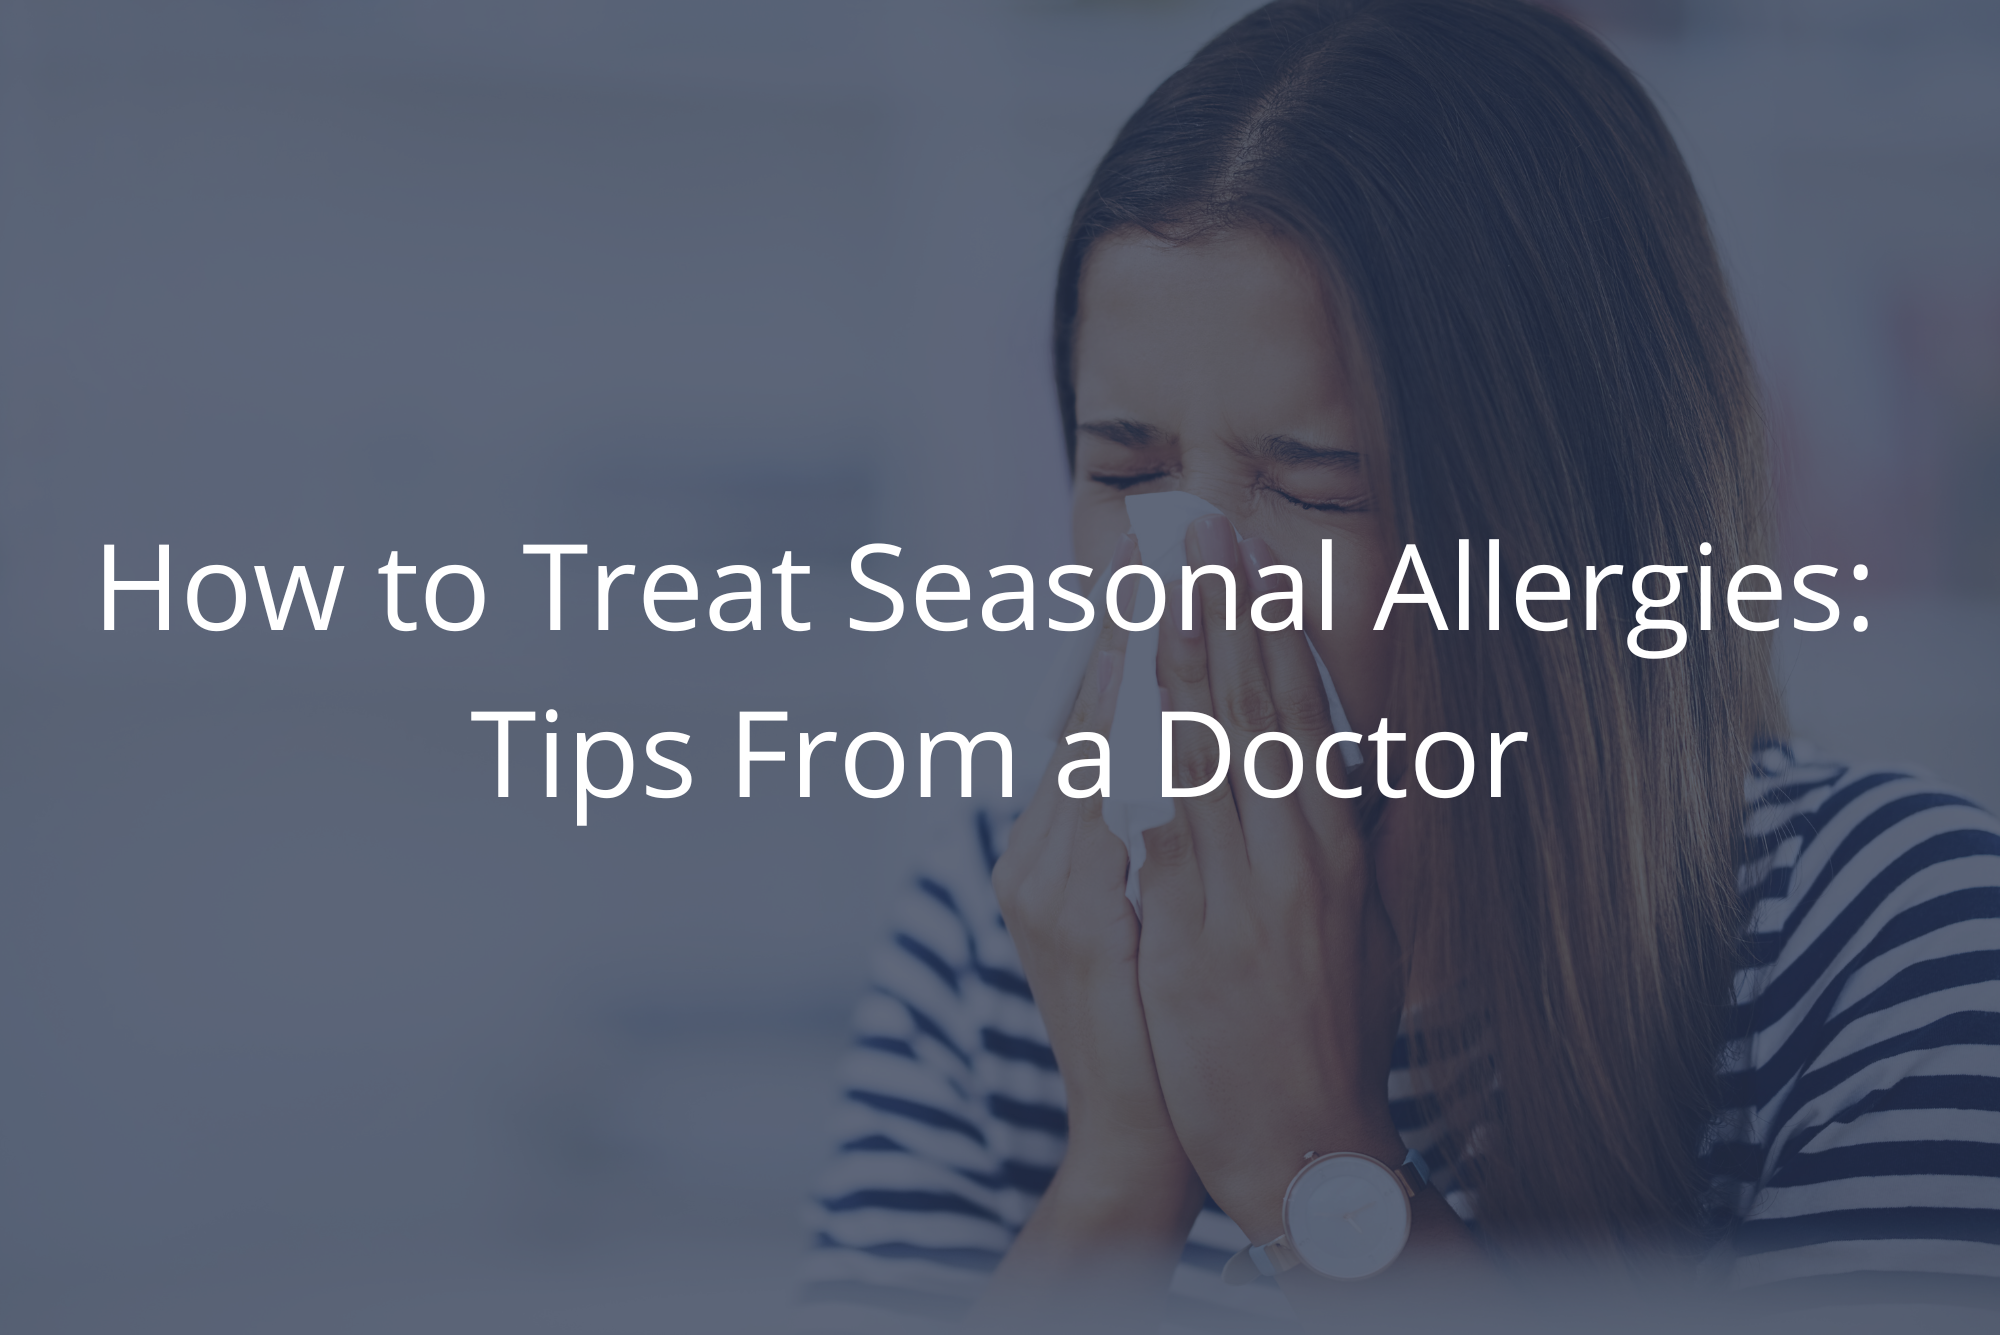 A woman in need of tips for seasonal allergies blows her nose into a tissue.